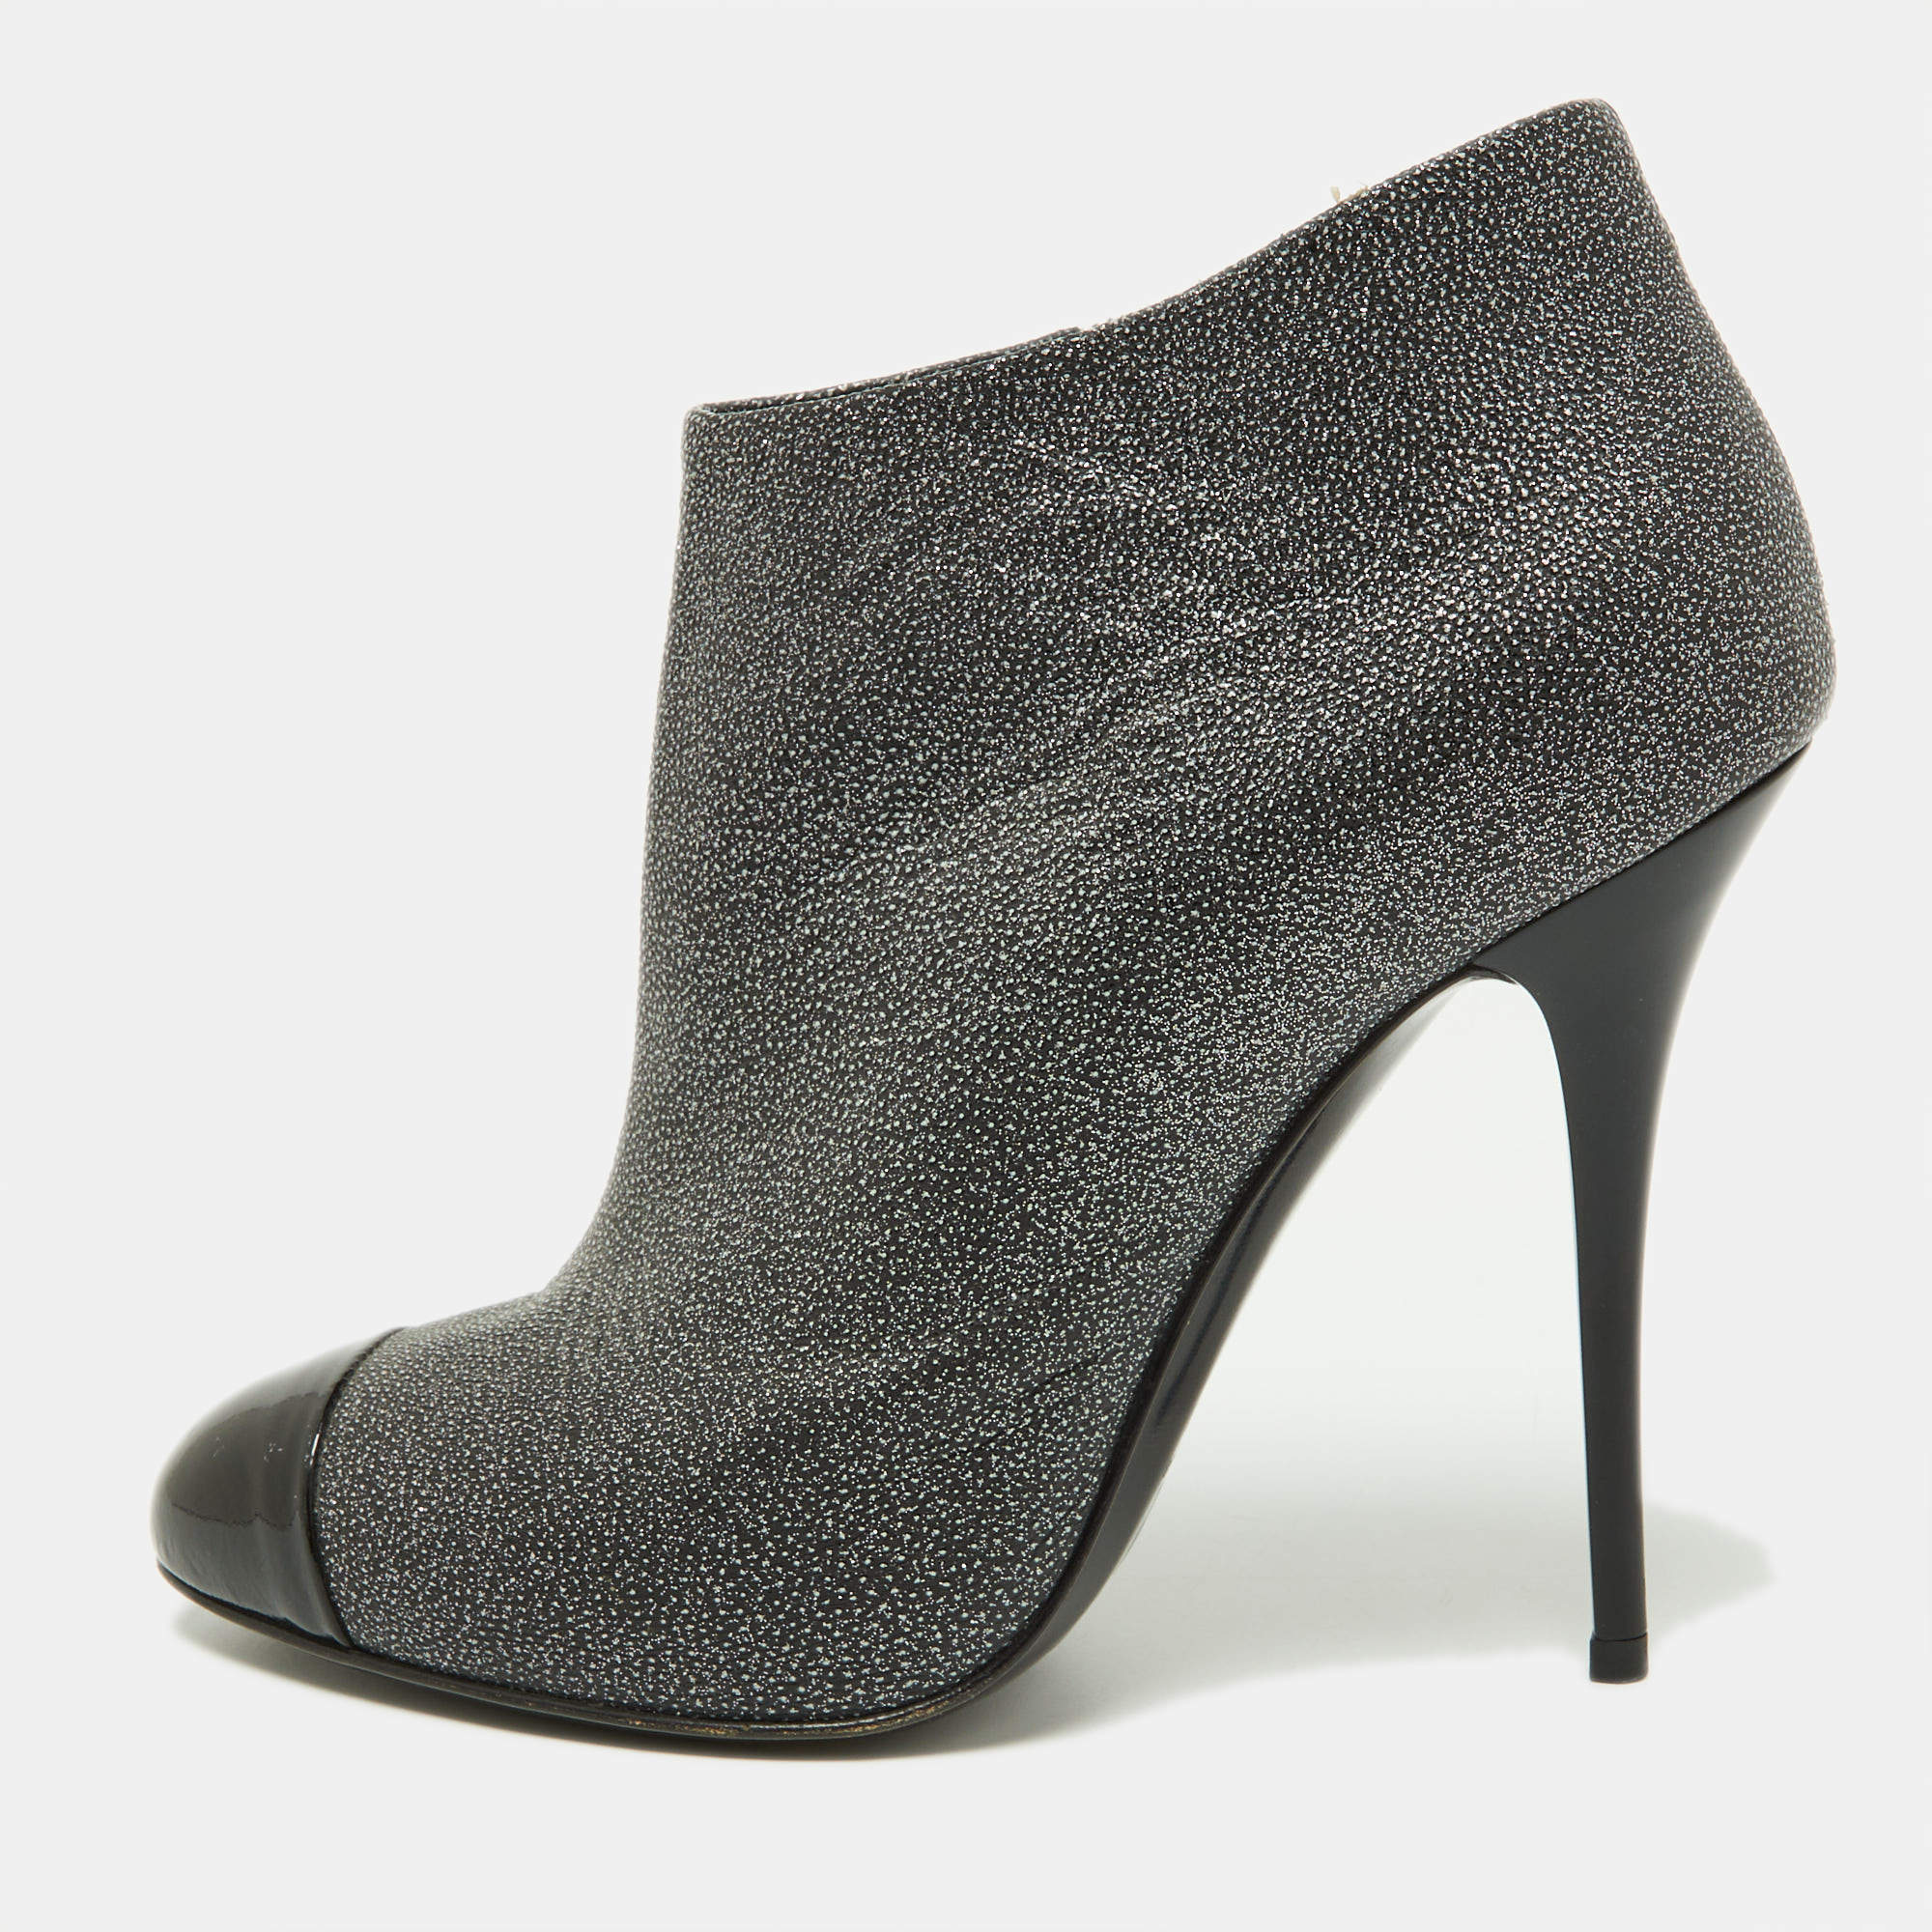 Giuseppe Zanotti Grey/Black Faux Leather and Patent Booties Size 36.5